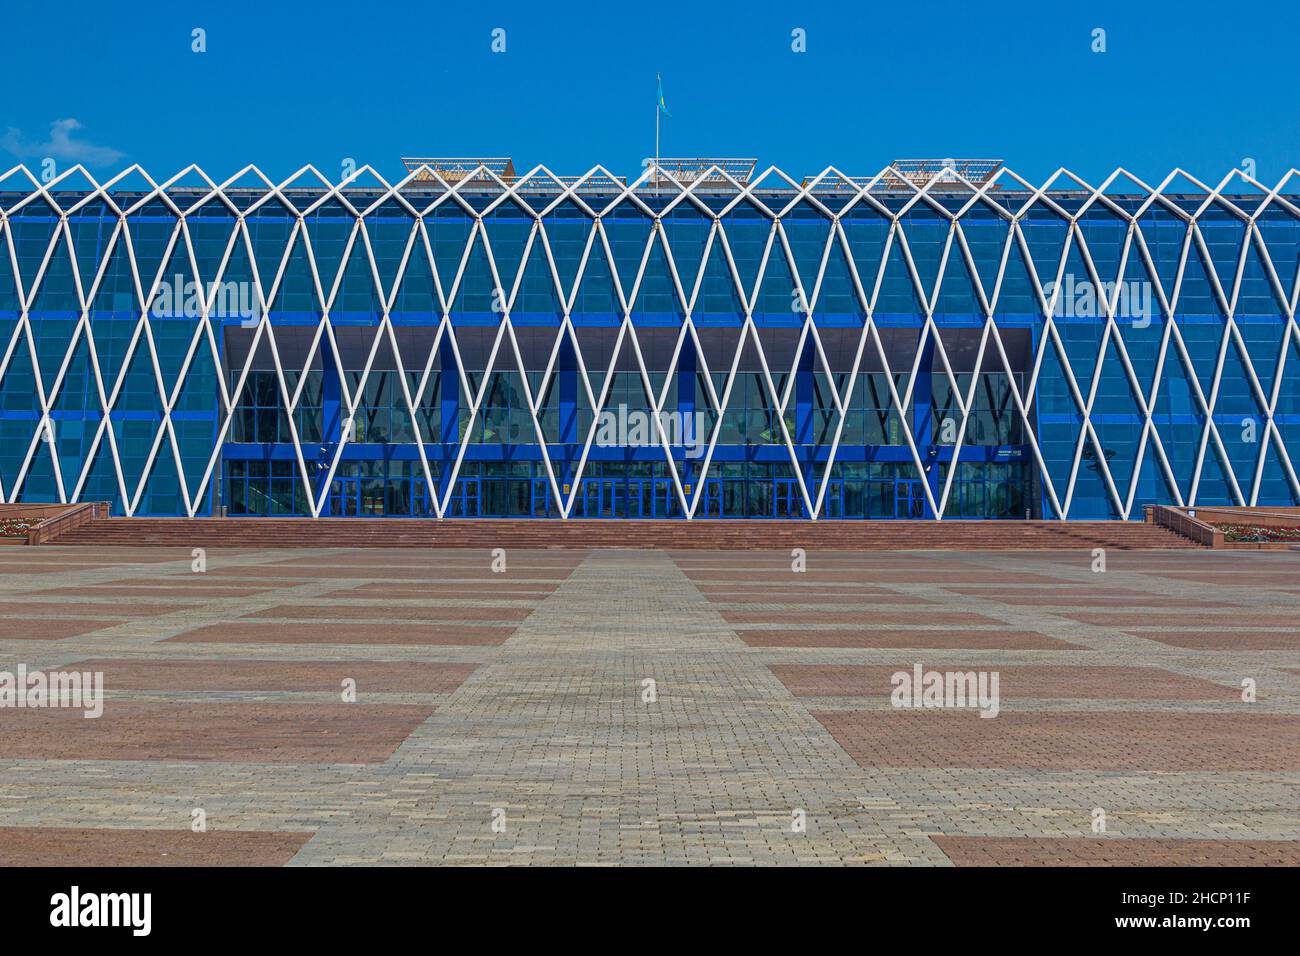 ASTANA, KAZAKHSTAN - JULY 9, 2018: Palace of Independence on the Independence Square in Astana now Nur-Sultan , capital of Kazakhstan. Stock Photo